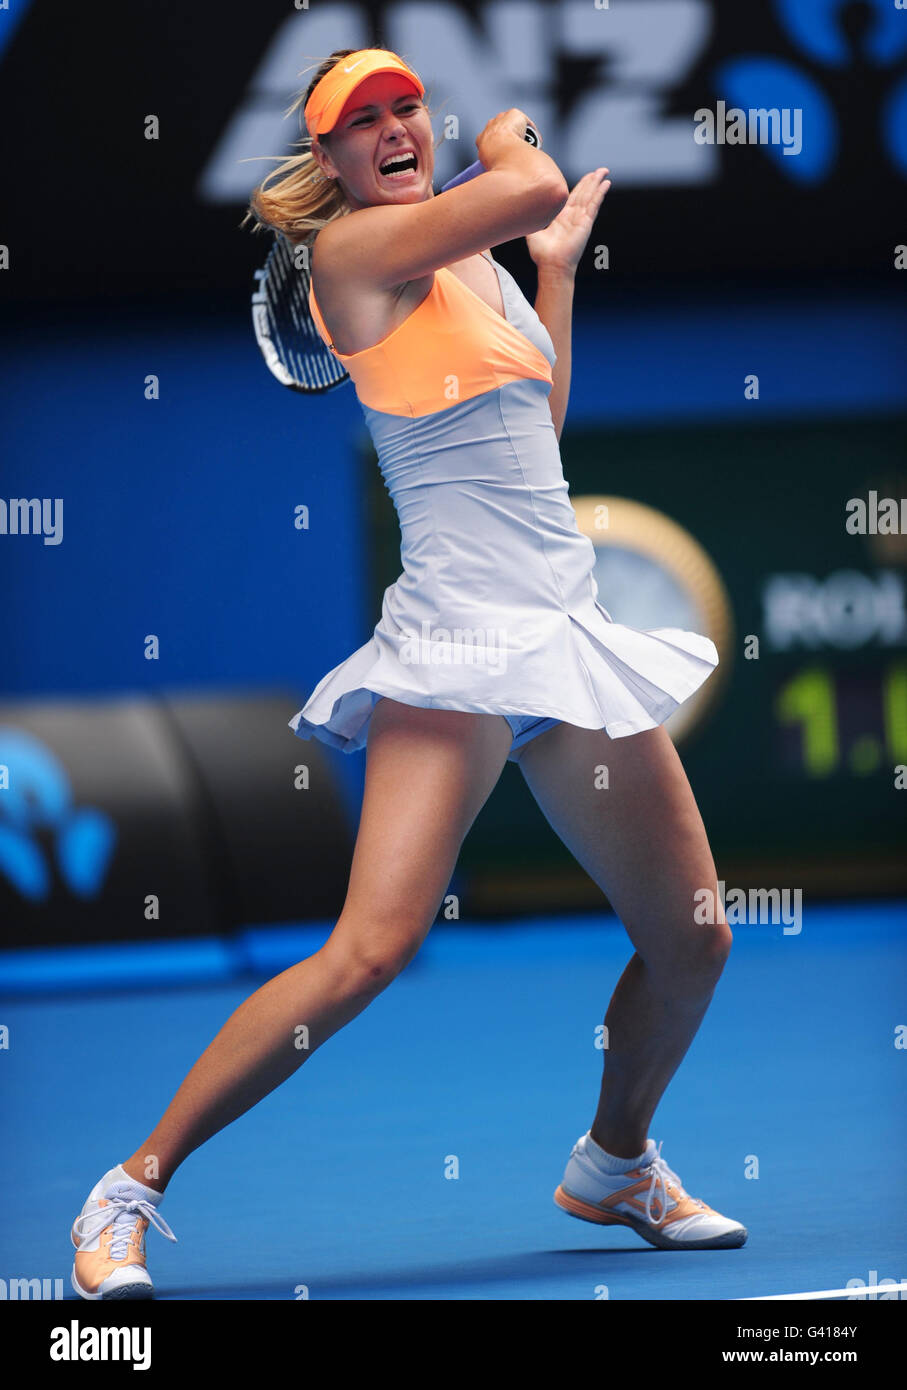 Russia's Maria Sharapova in action against Thailand's Tamarine Tanasugarn during day one of the 2011 Australian Open at Melbourne Park in Melbourne, Australia. Stock Photo